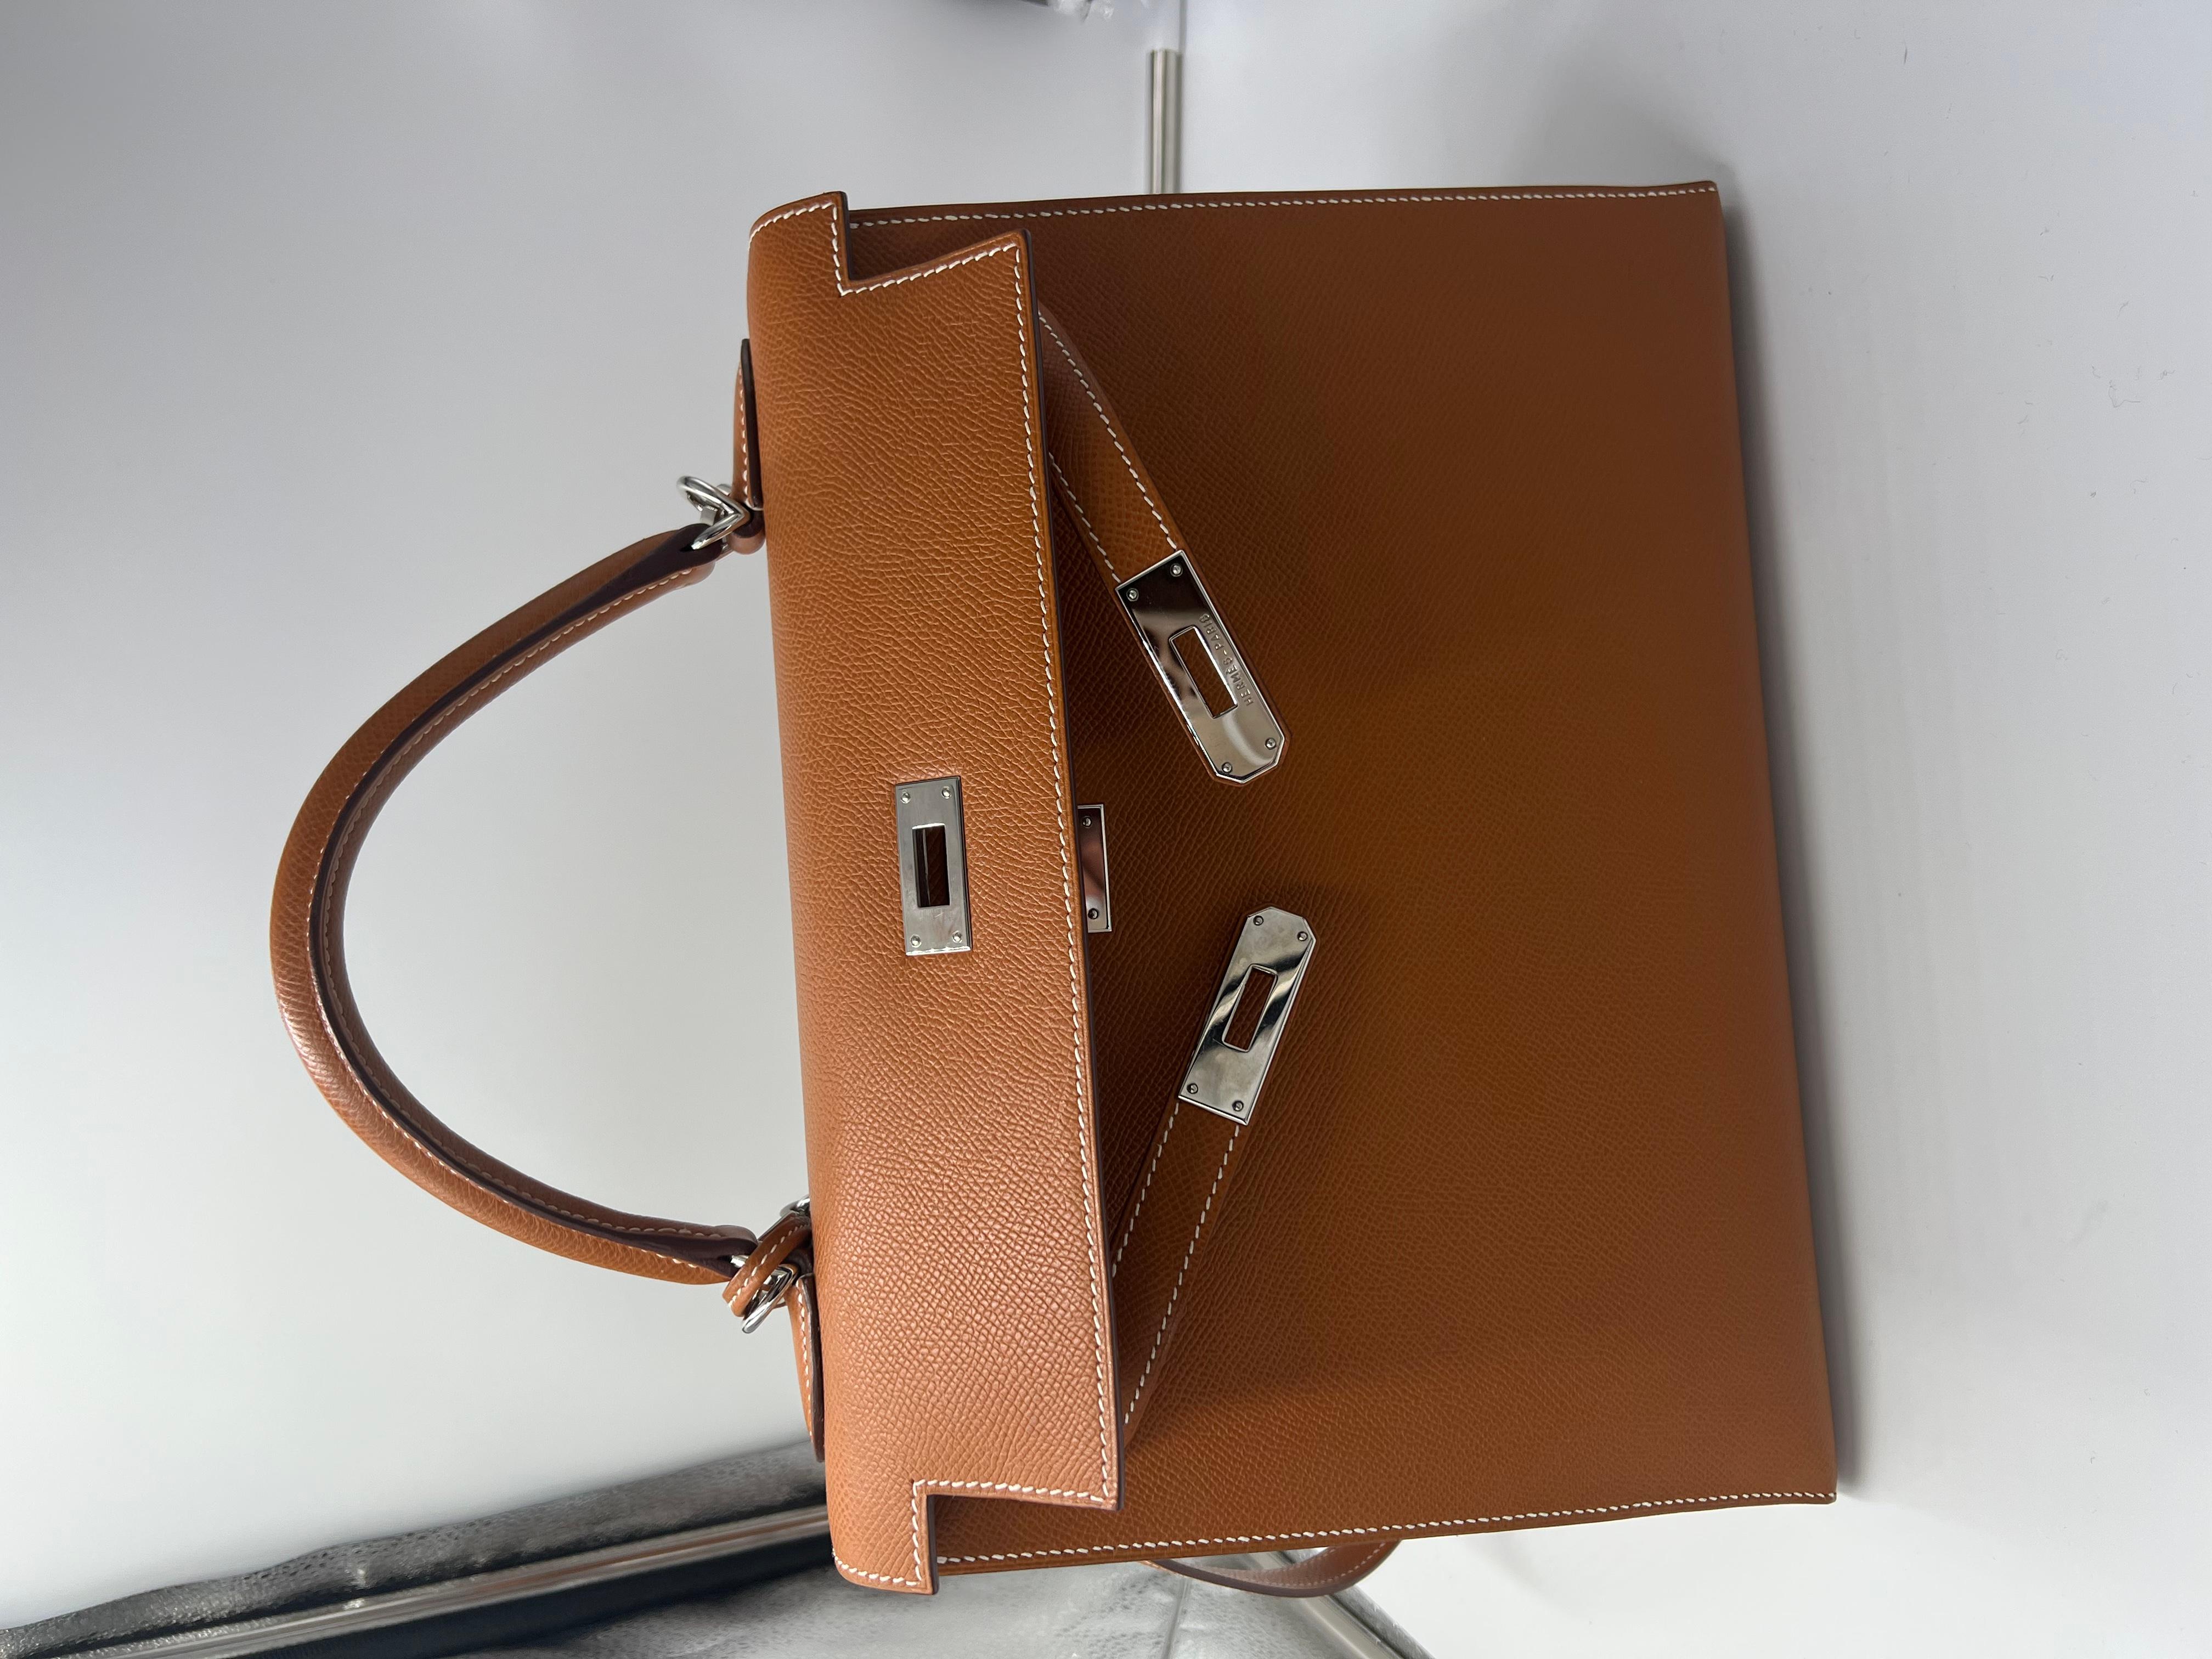 Hermes Kelly 32 Gold colour with palladium hardware epsom leather. It comes in excellent condition, with dustbag, clochete lock and keys. 